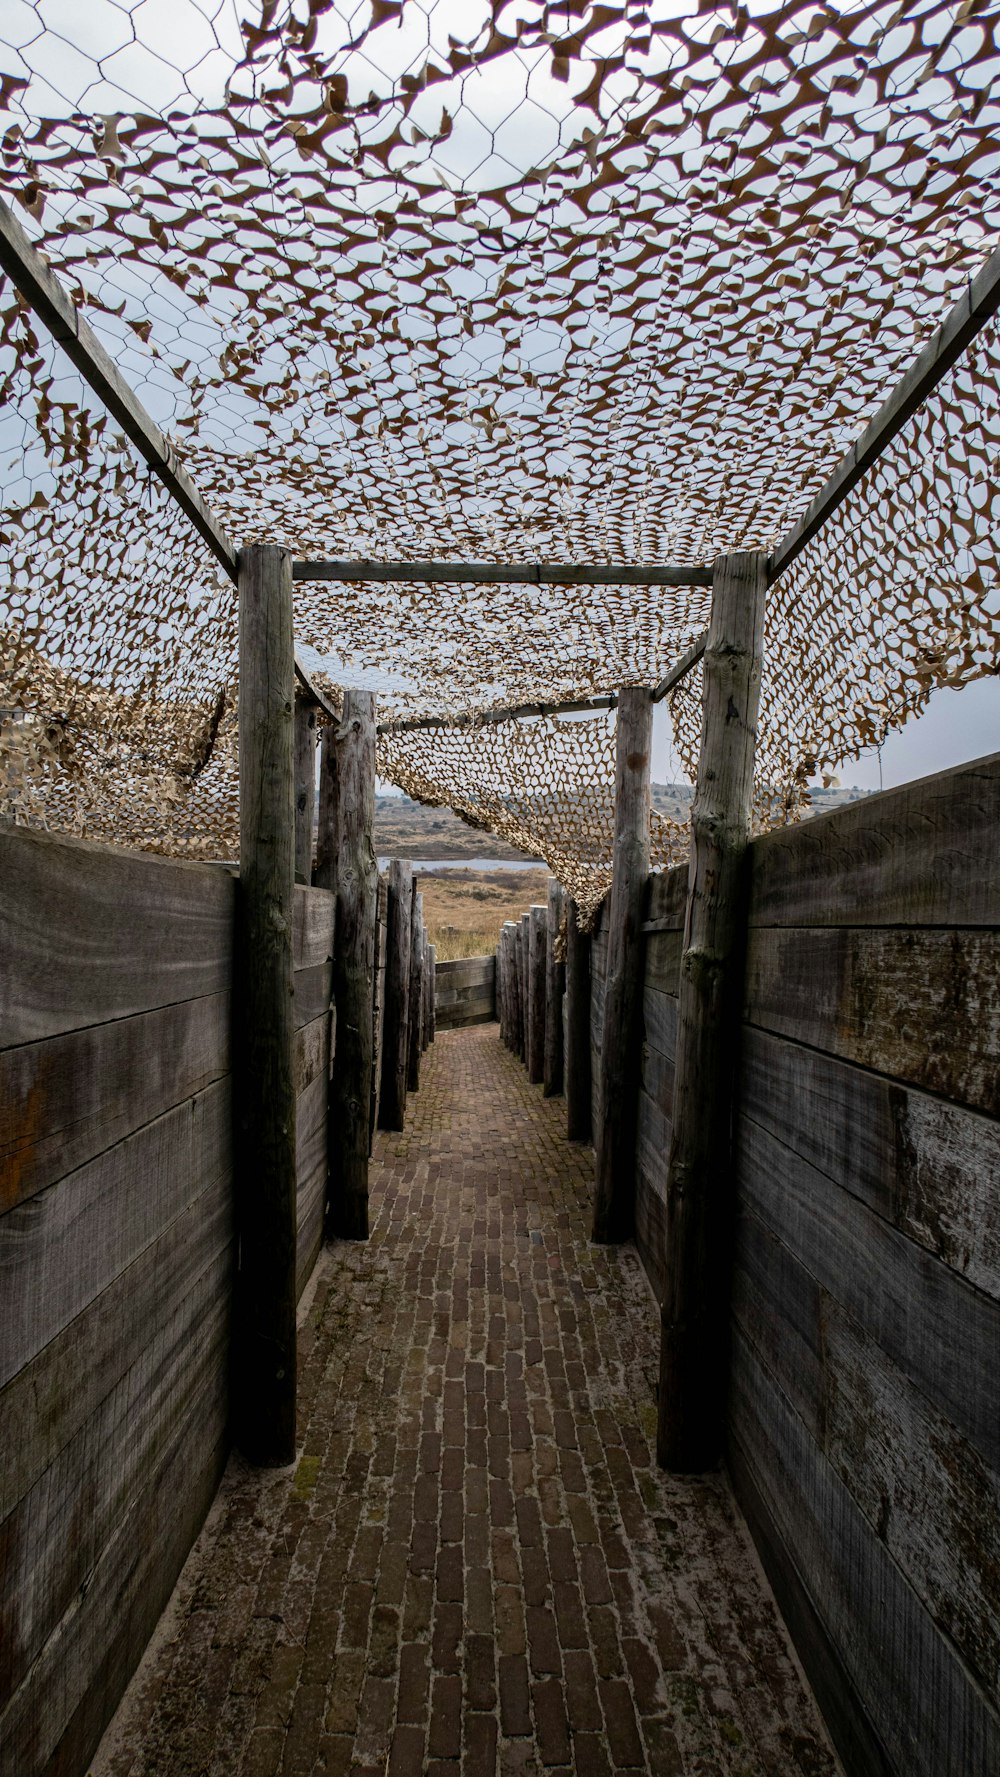 a walkway lined with wooden posts and netting